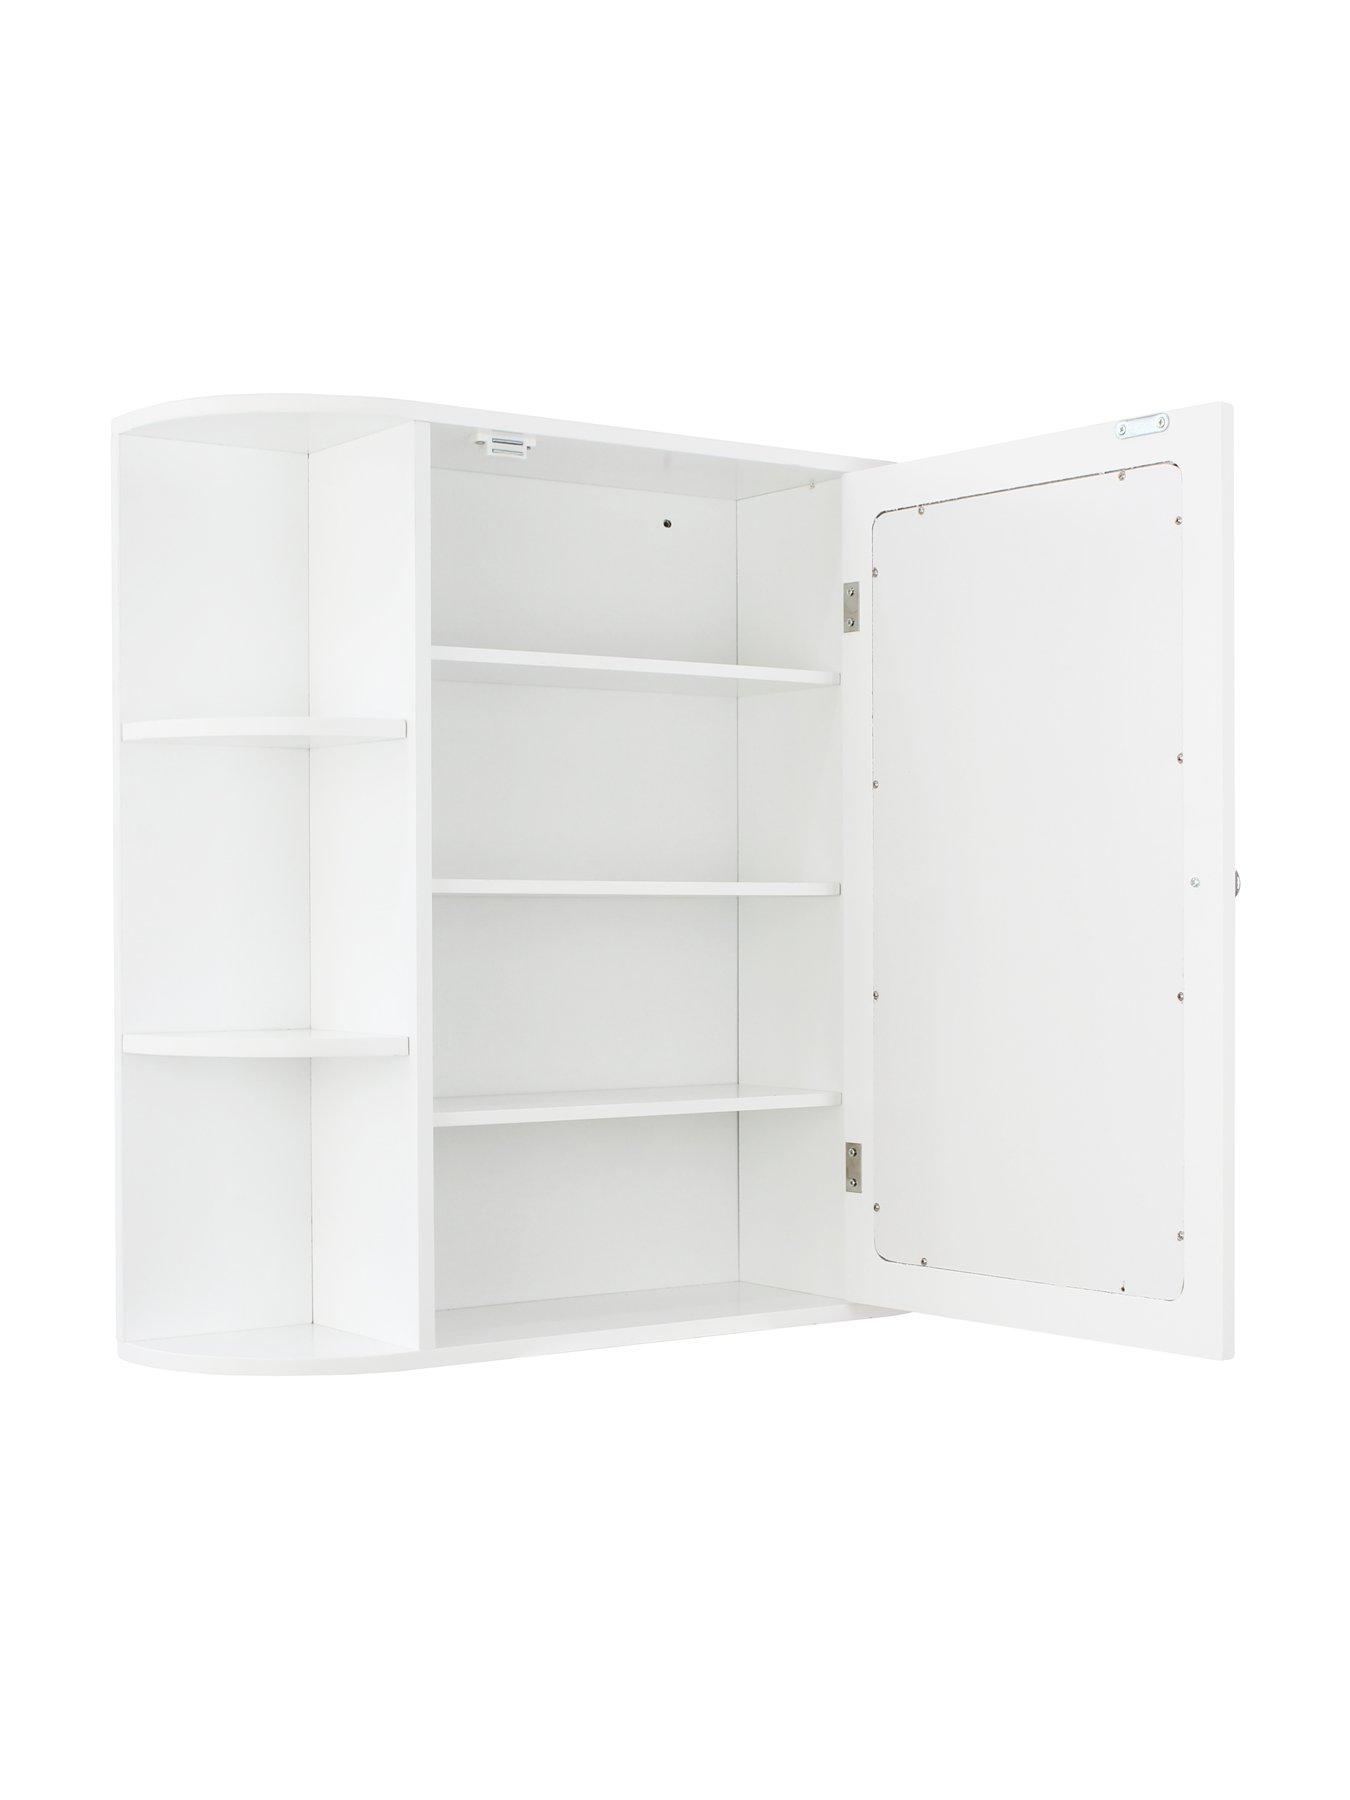 Lloyd Pascal Devonshire Mirrored Bathroom Wall Cabinet - White | very.co.uk